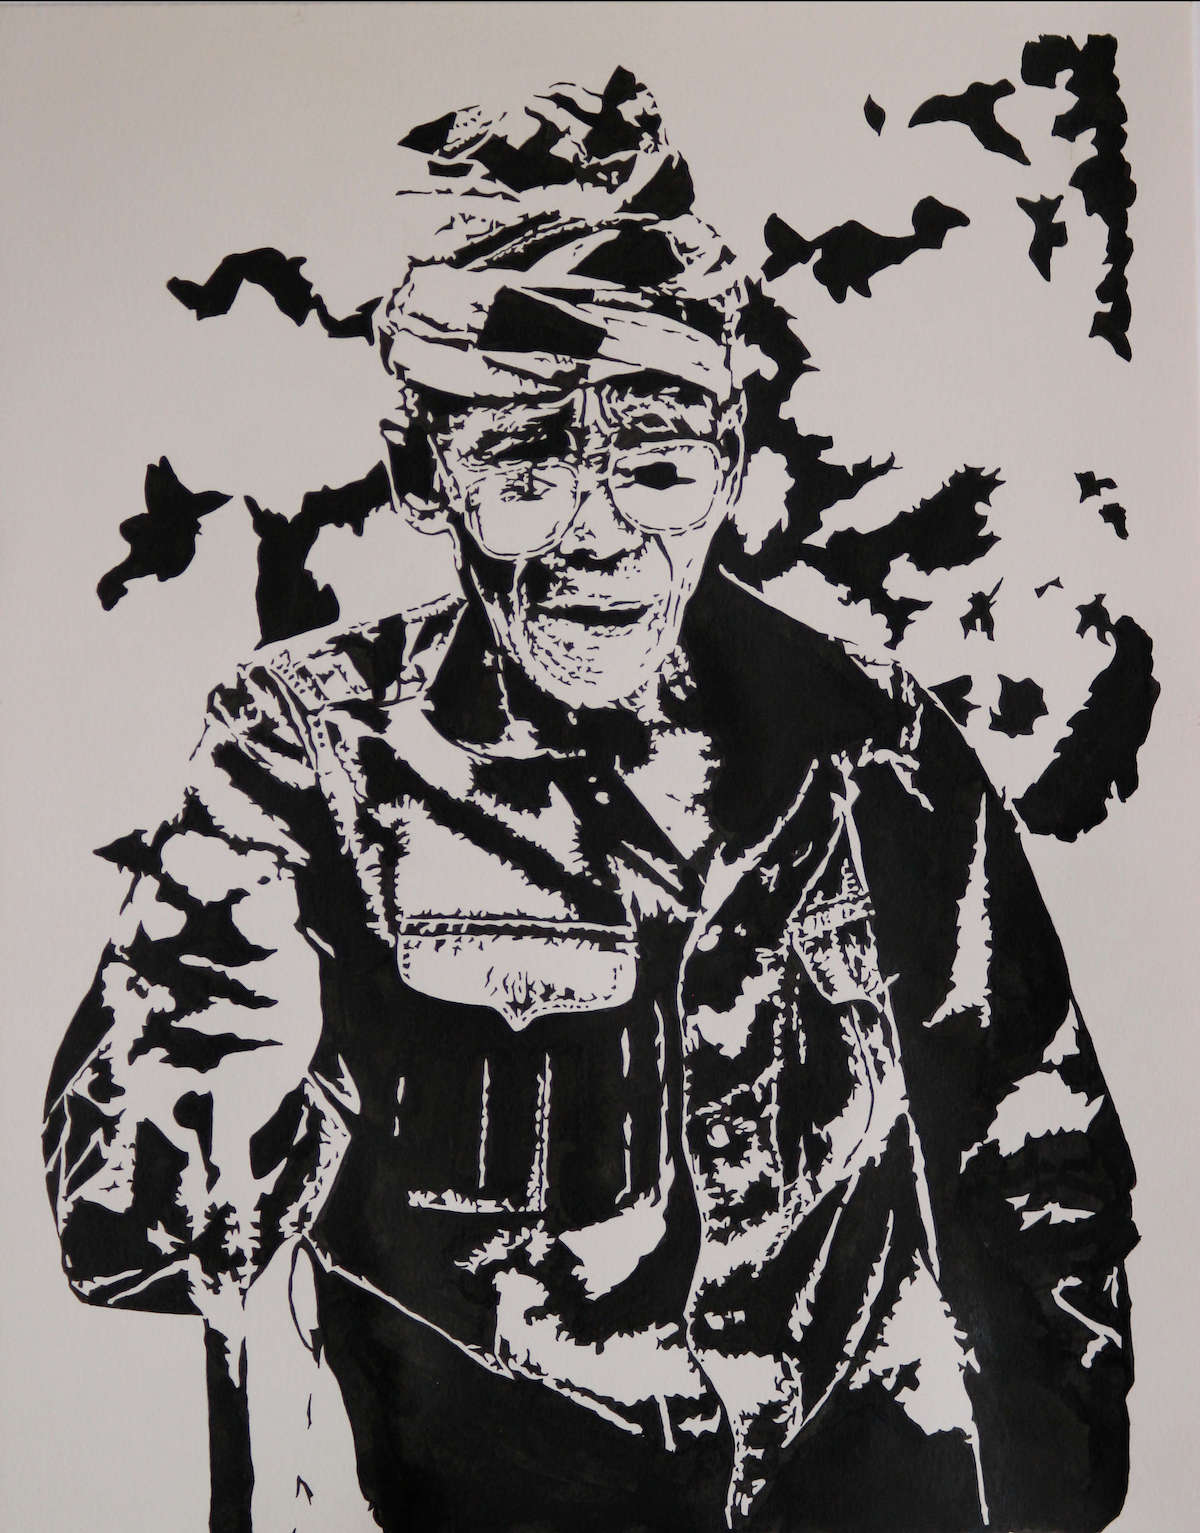 Black and white painting of an old man walking